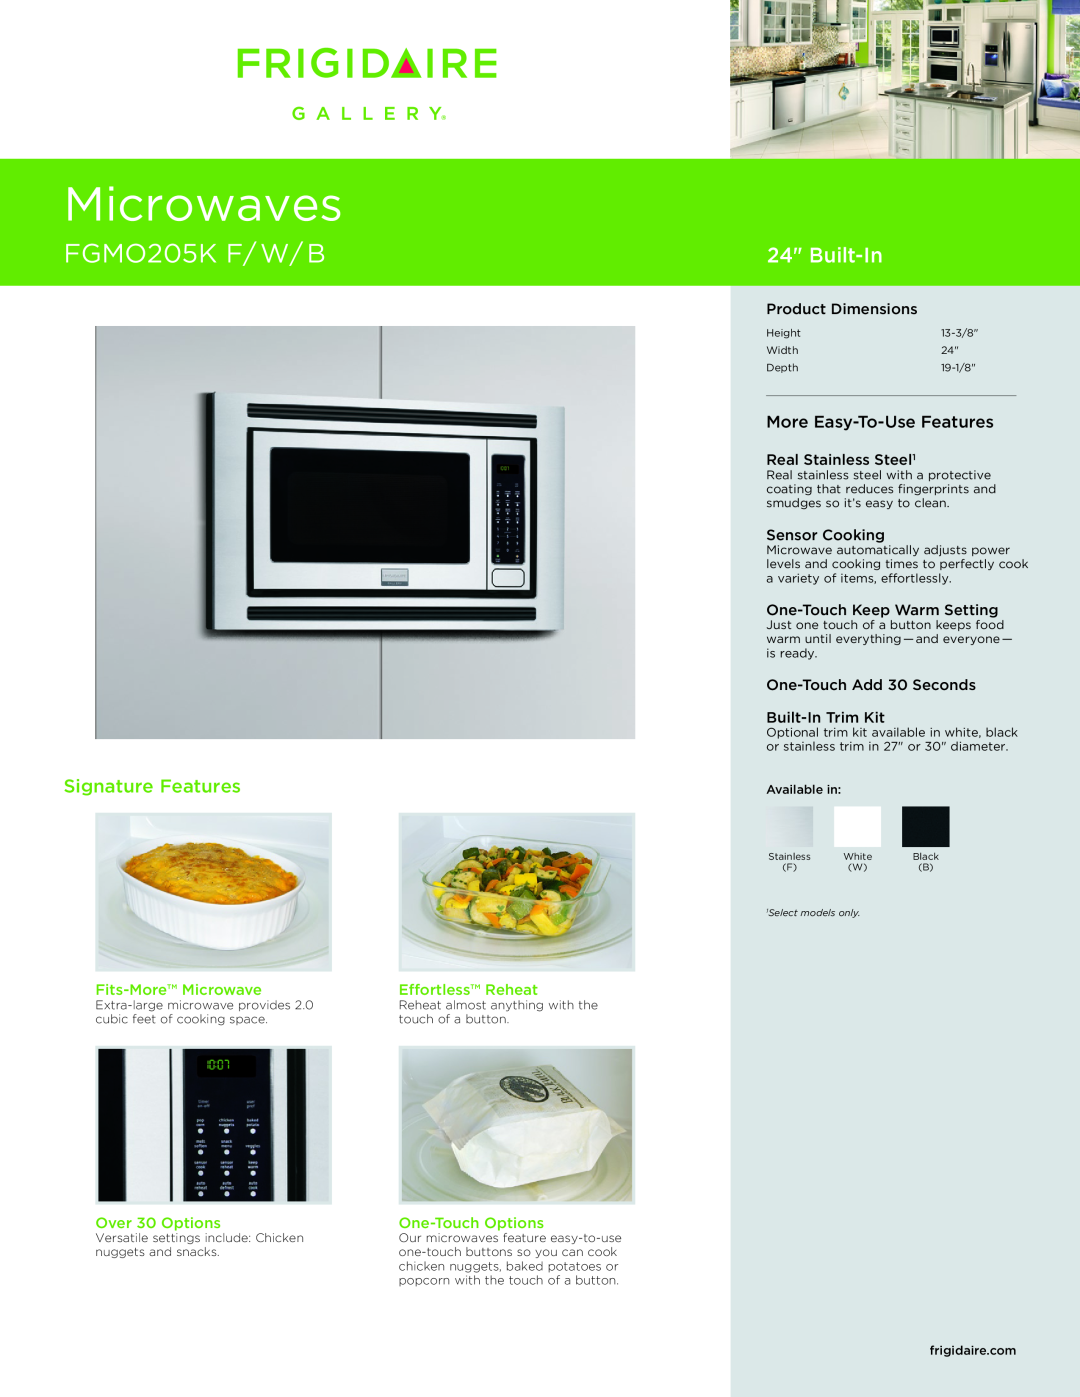 Frigidaire FGMO205K manual Fits-MoreMicrowave, Effortless Reheat, Over 30 Options, One-TouchOptions, Product Dimensions 